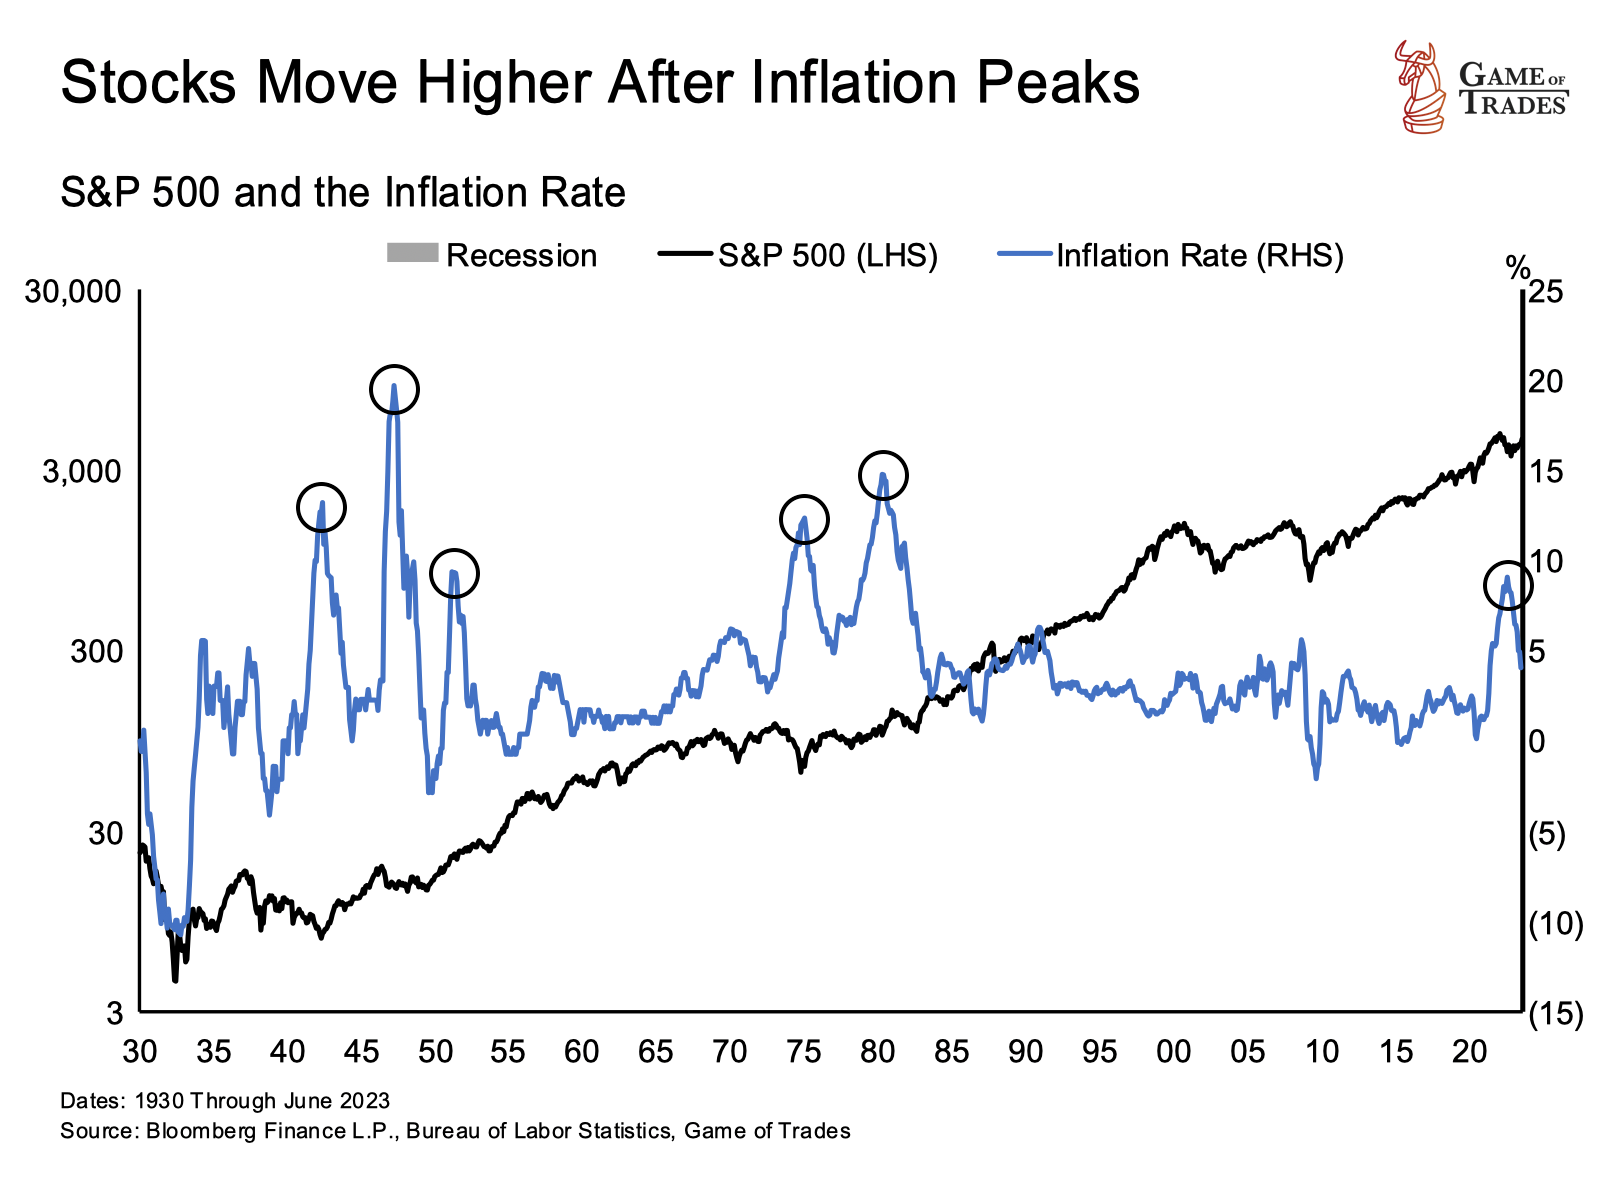 S&P 500 and the inflation rate